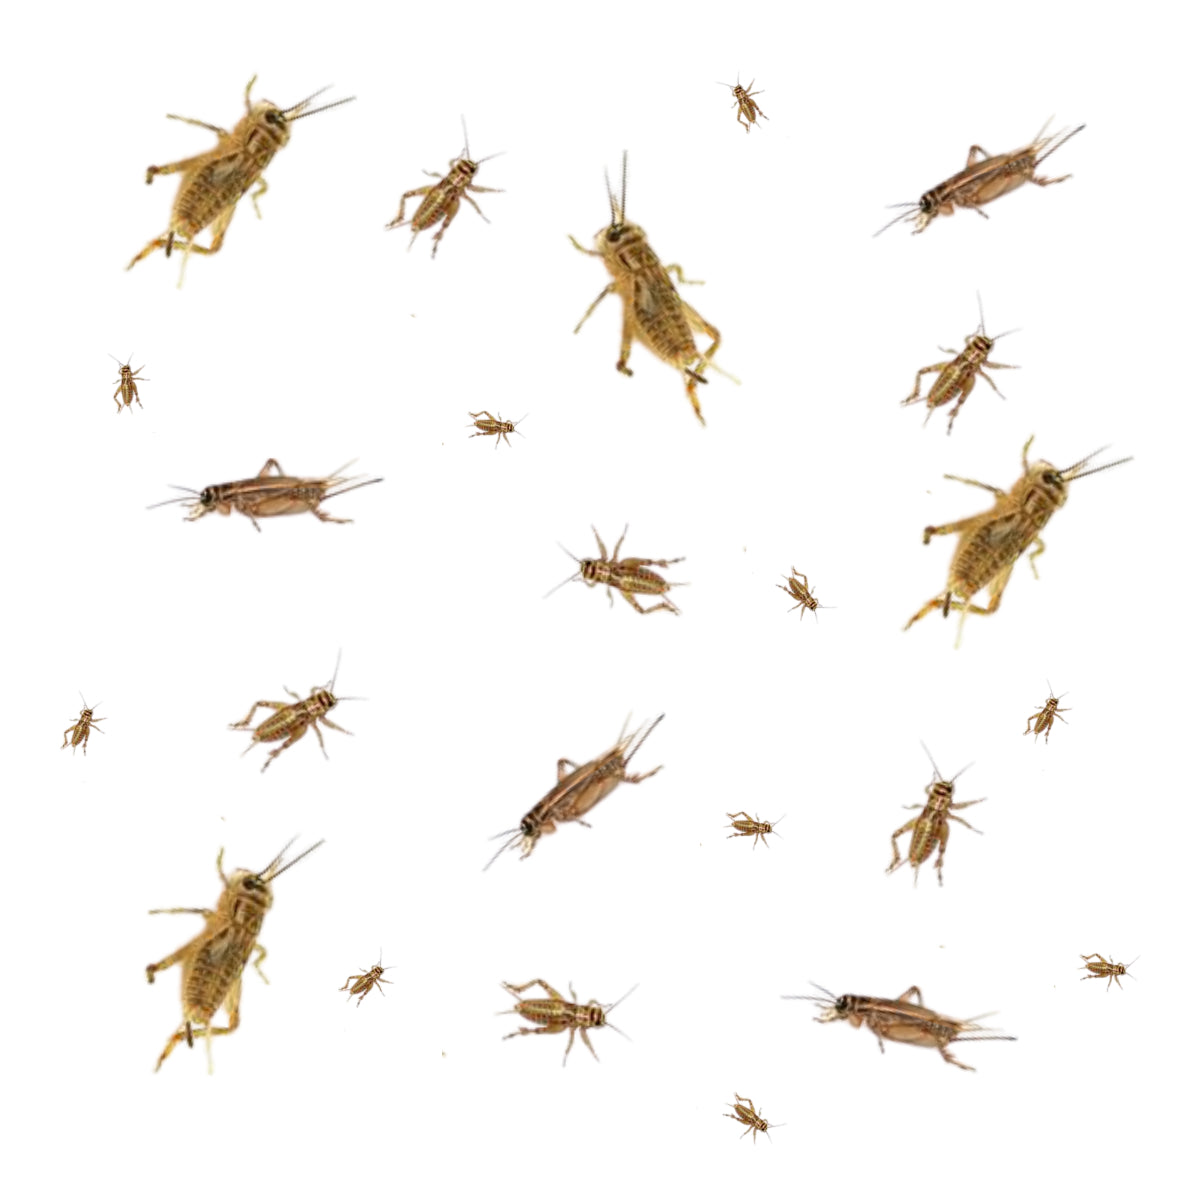 Live Crickets For Sale For Reptiles – Big Apple Herp - Reptiles For Sale